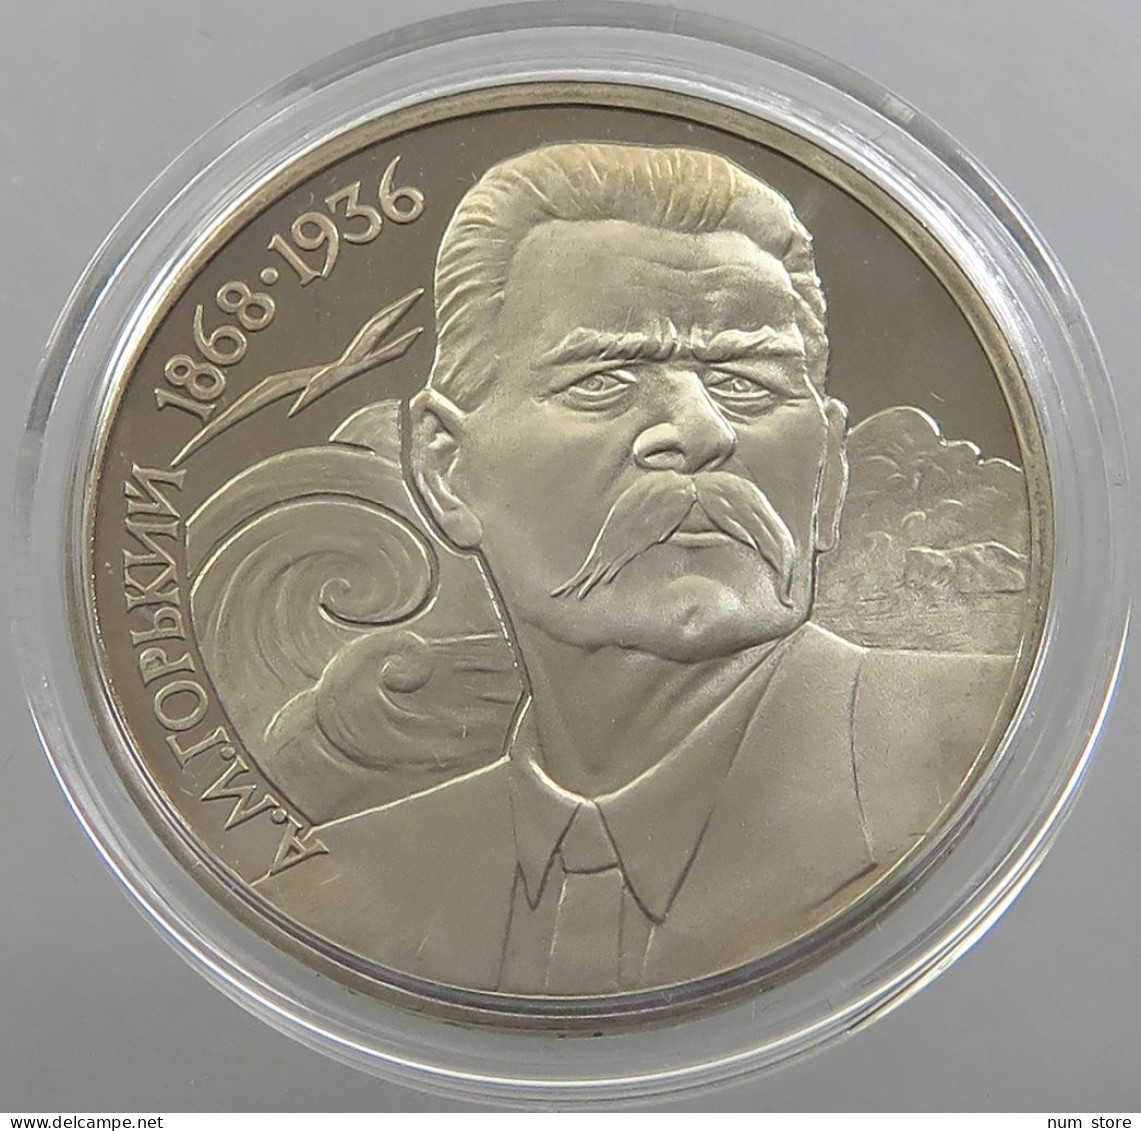 RUSSIA USSR 1 ROUBLE 1988 GORKI PROOF #sm14 0537 - Russland